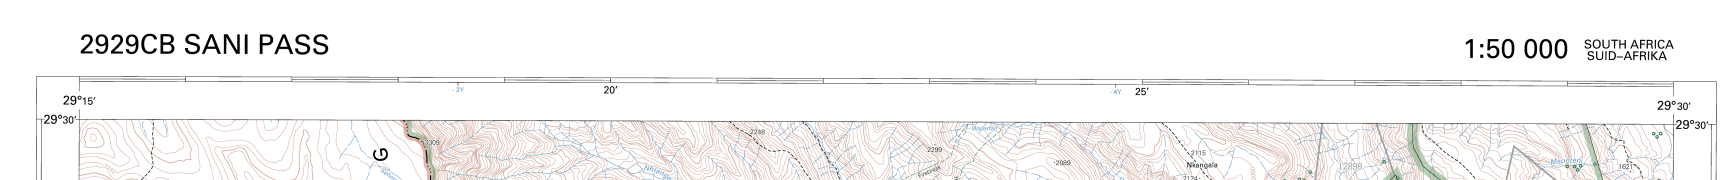 Data Defined Settings for Grid Placements in QGIS 3.12 - Cover Image